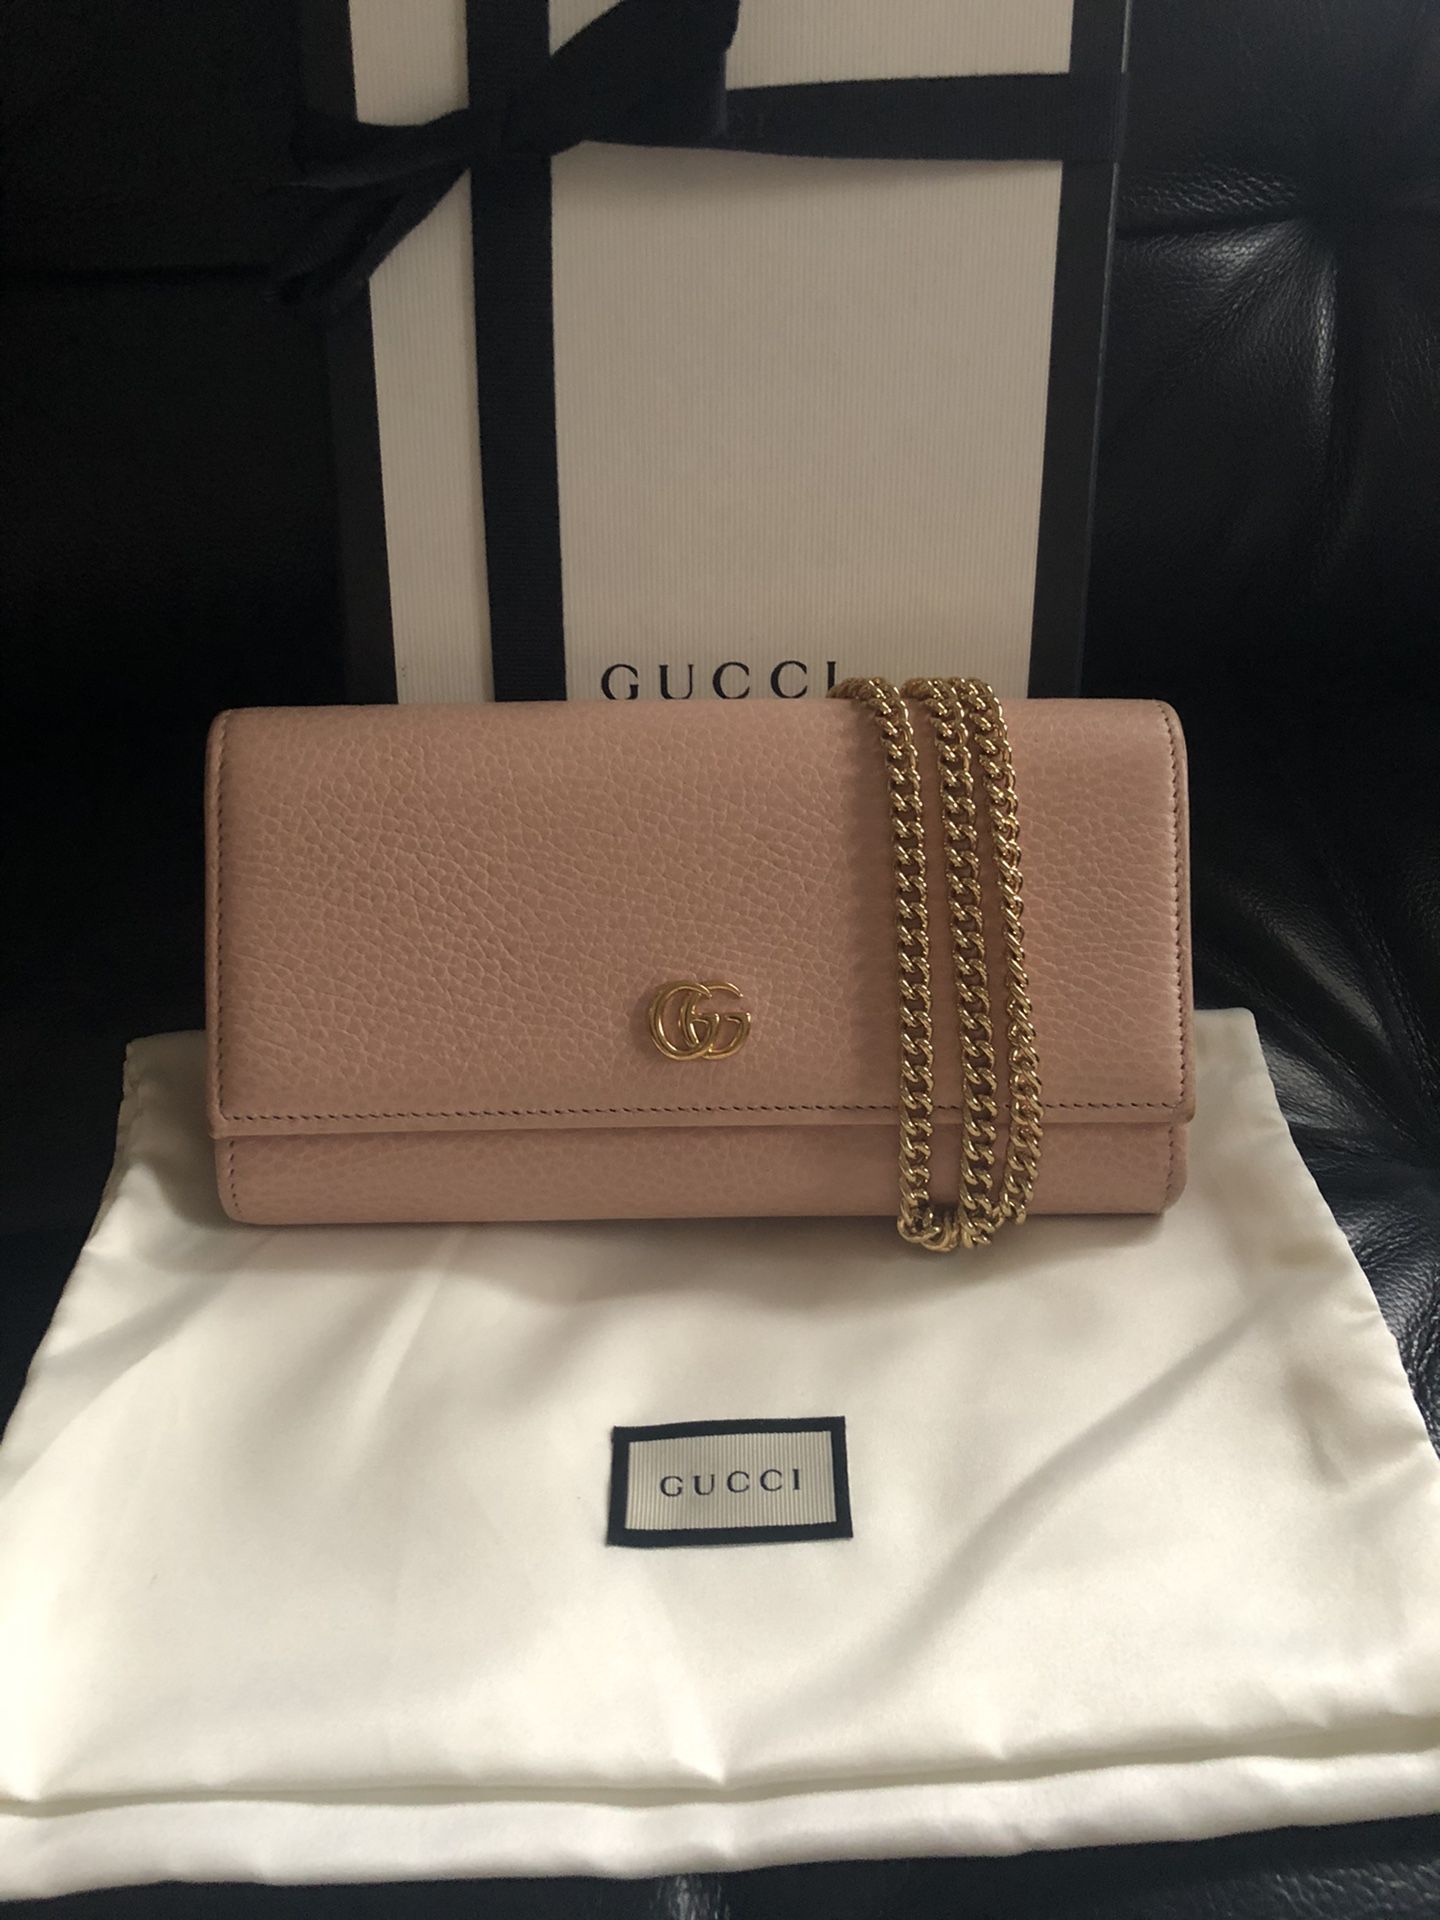 Gucci Marmont leather chain wallet